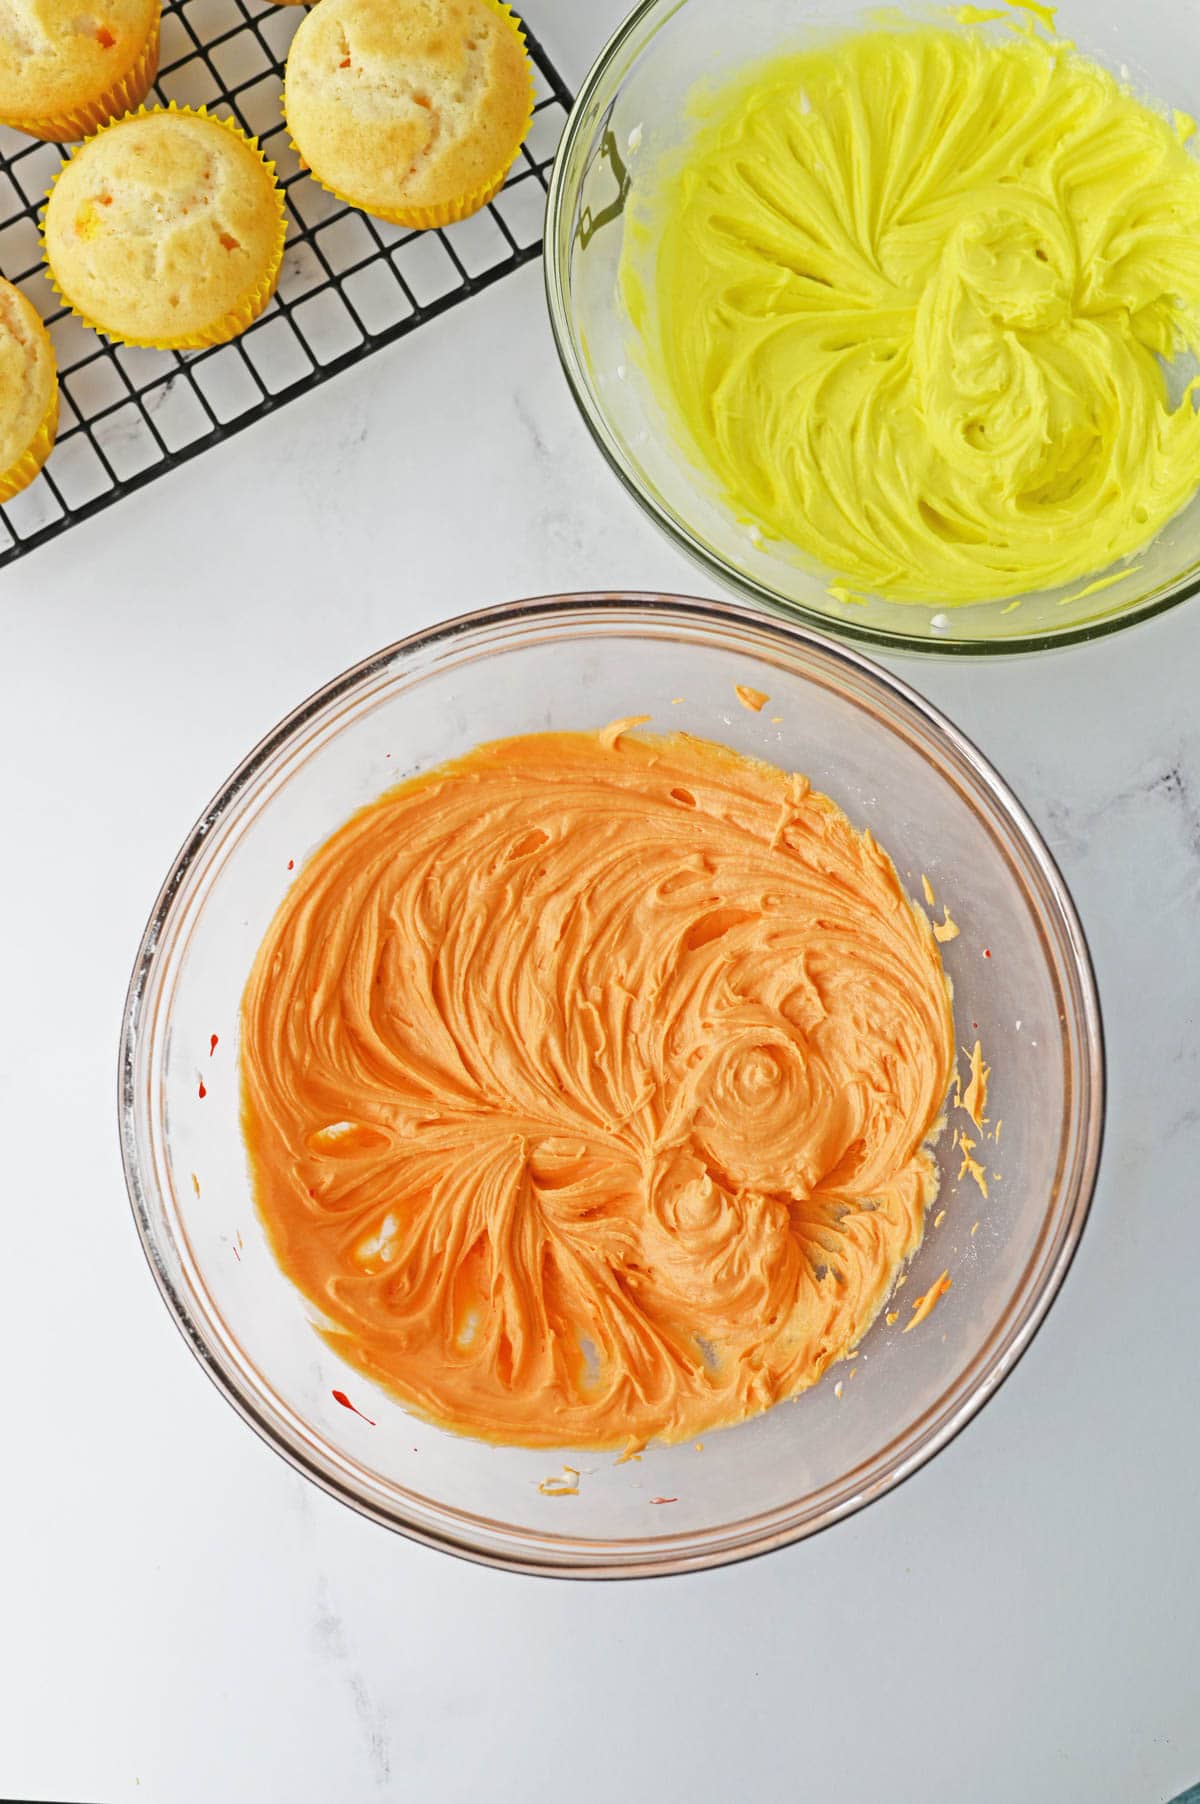 Buttercream frosting colored yellow and orange